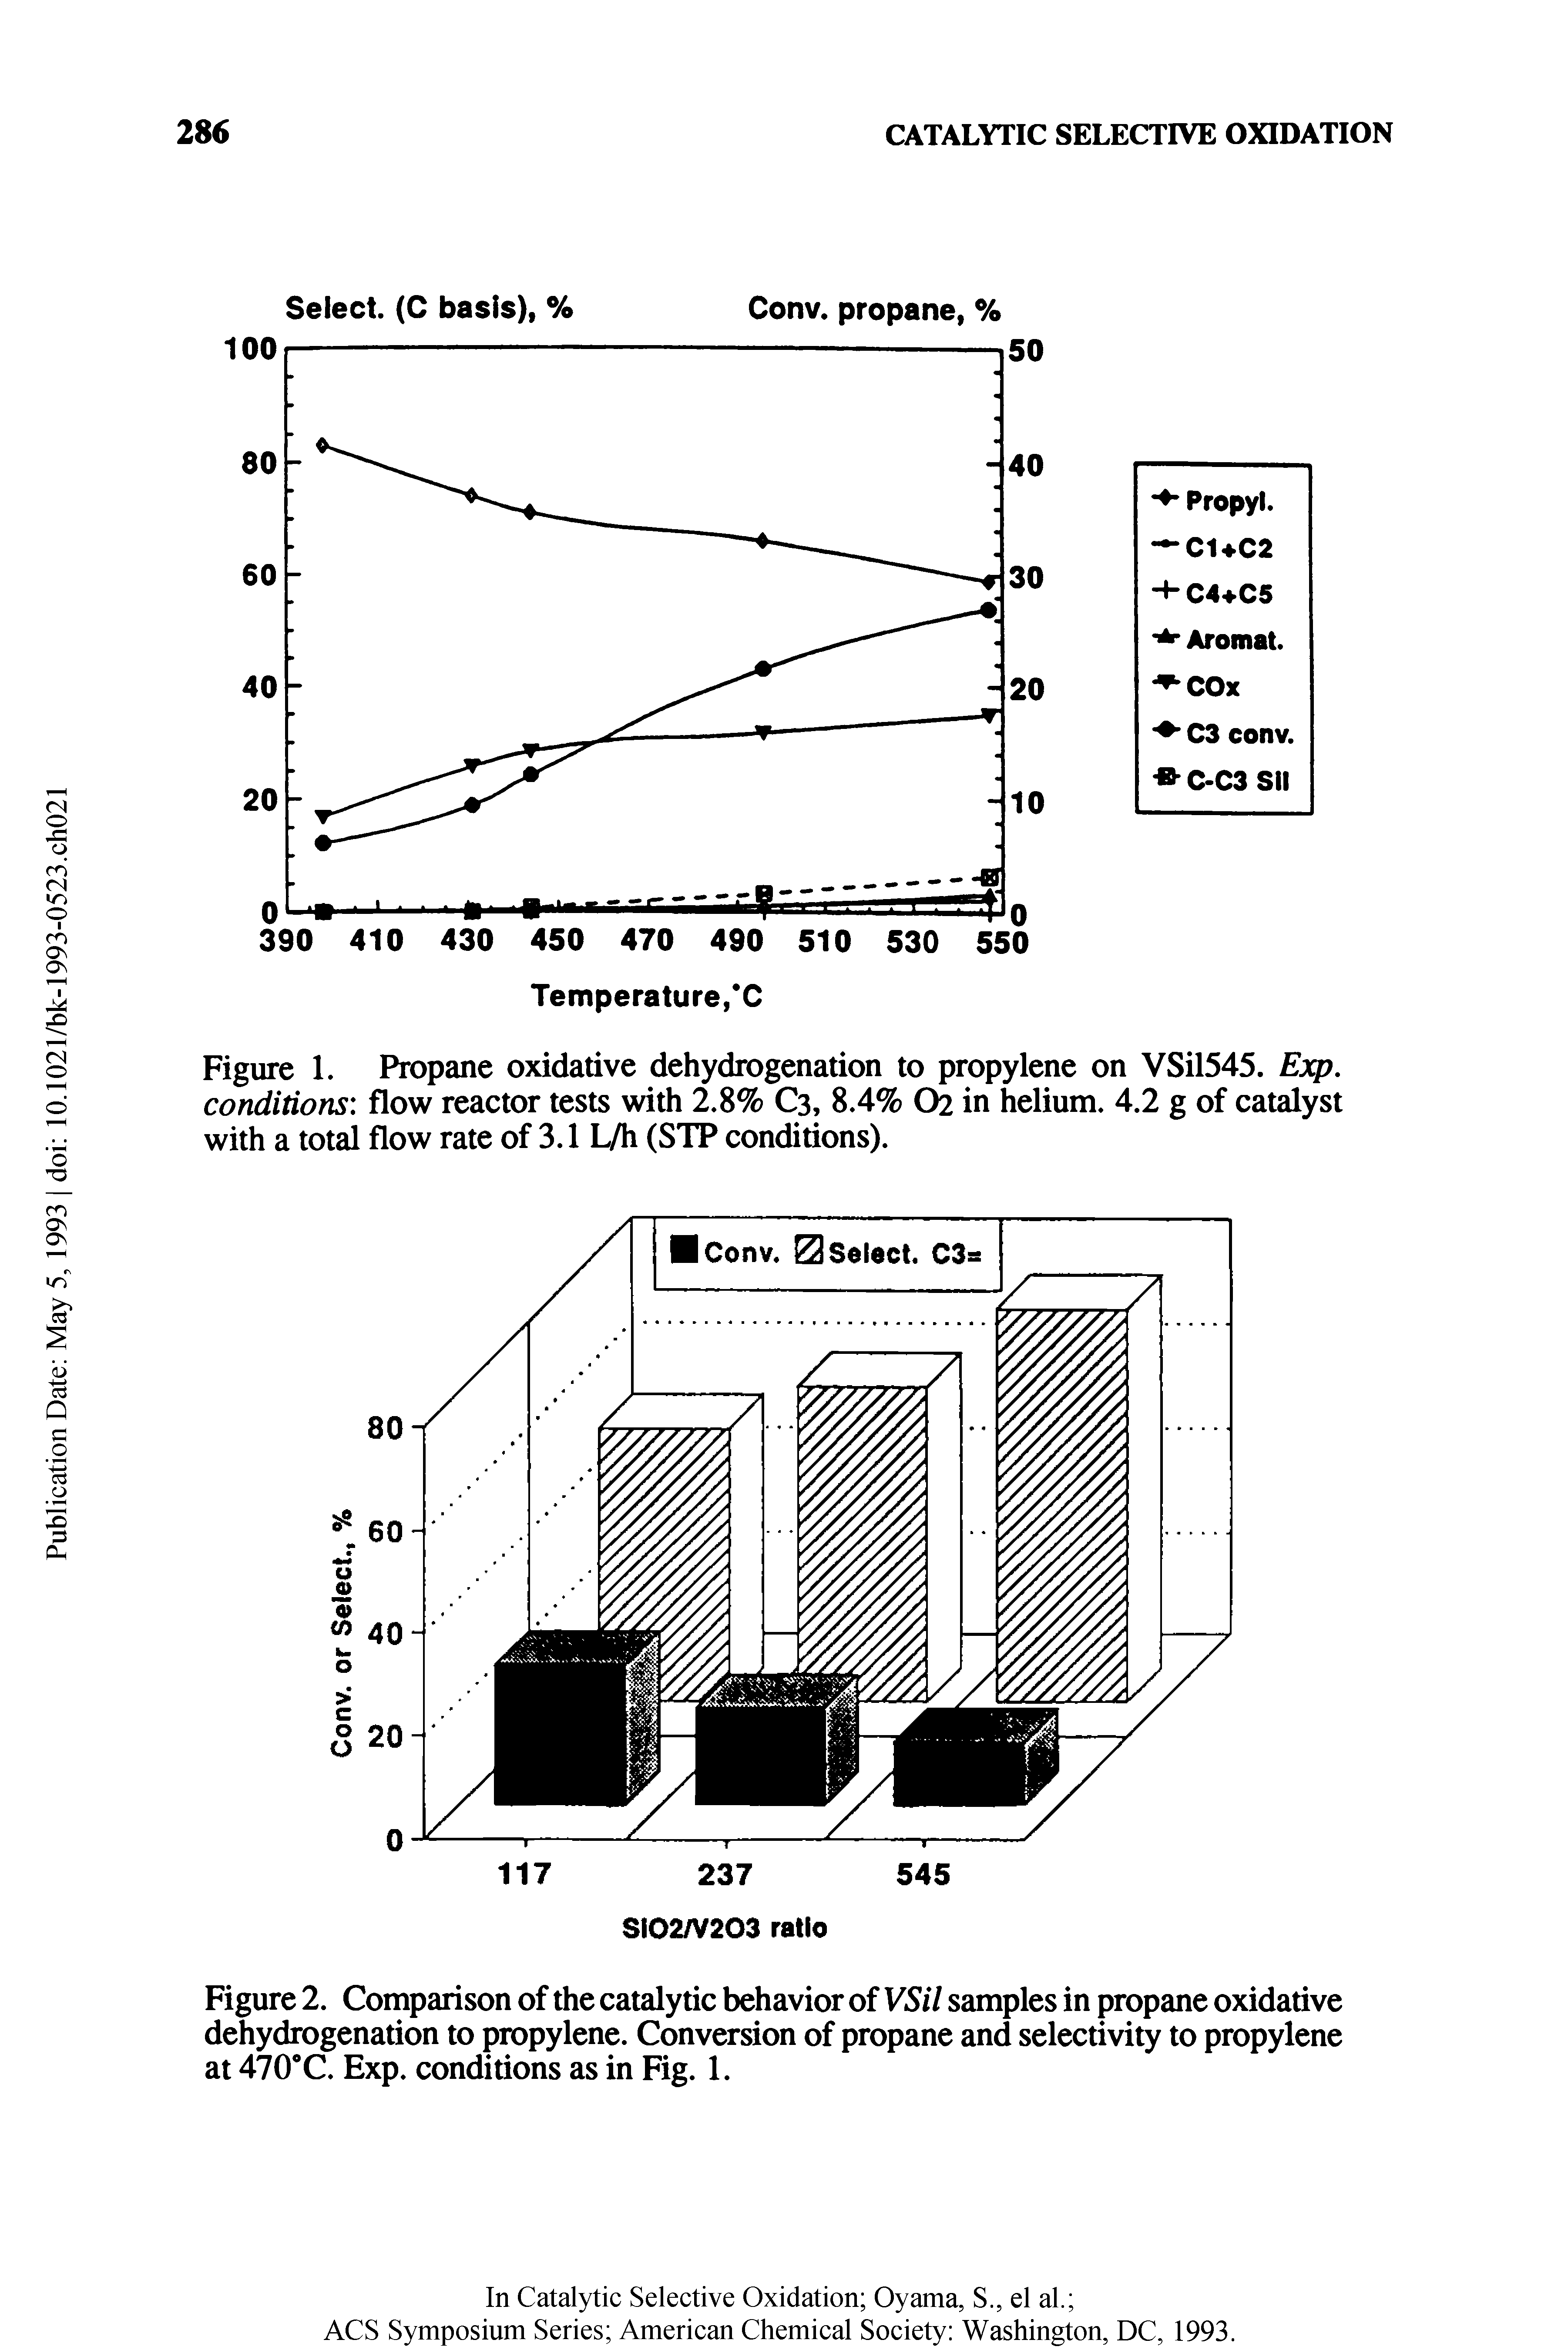 Figure 2. Comparison of the catalytic behavior of VSil samples in propane oxidative dehydrogenation to propylene. Conversion of propane and selectivity to propylene at 470 C. Exp. conditions as in Fig. 1.